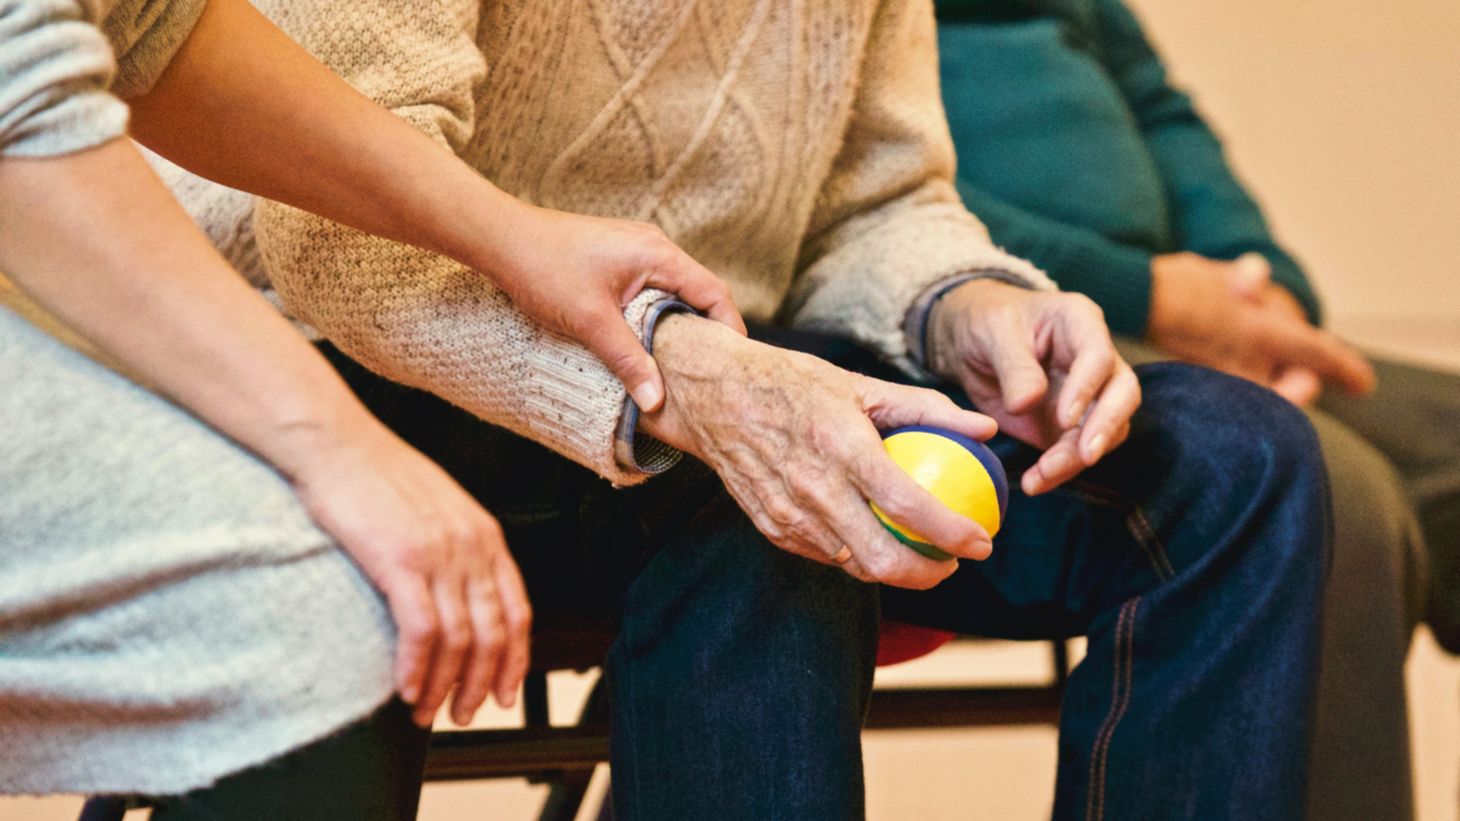 young woman resting her hand on an elderly man's arm while he holds a ball